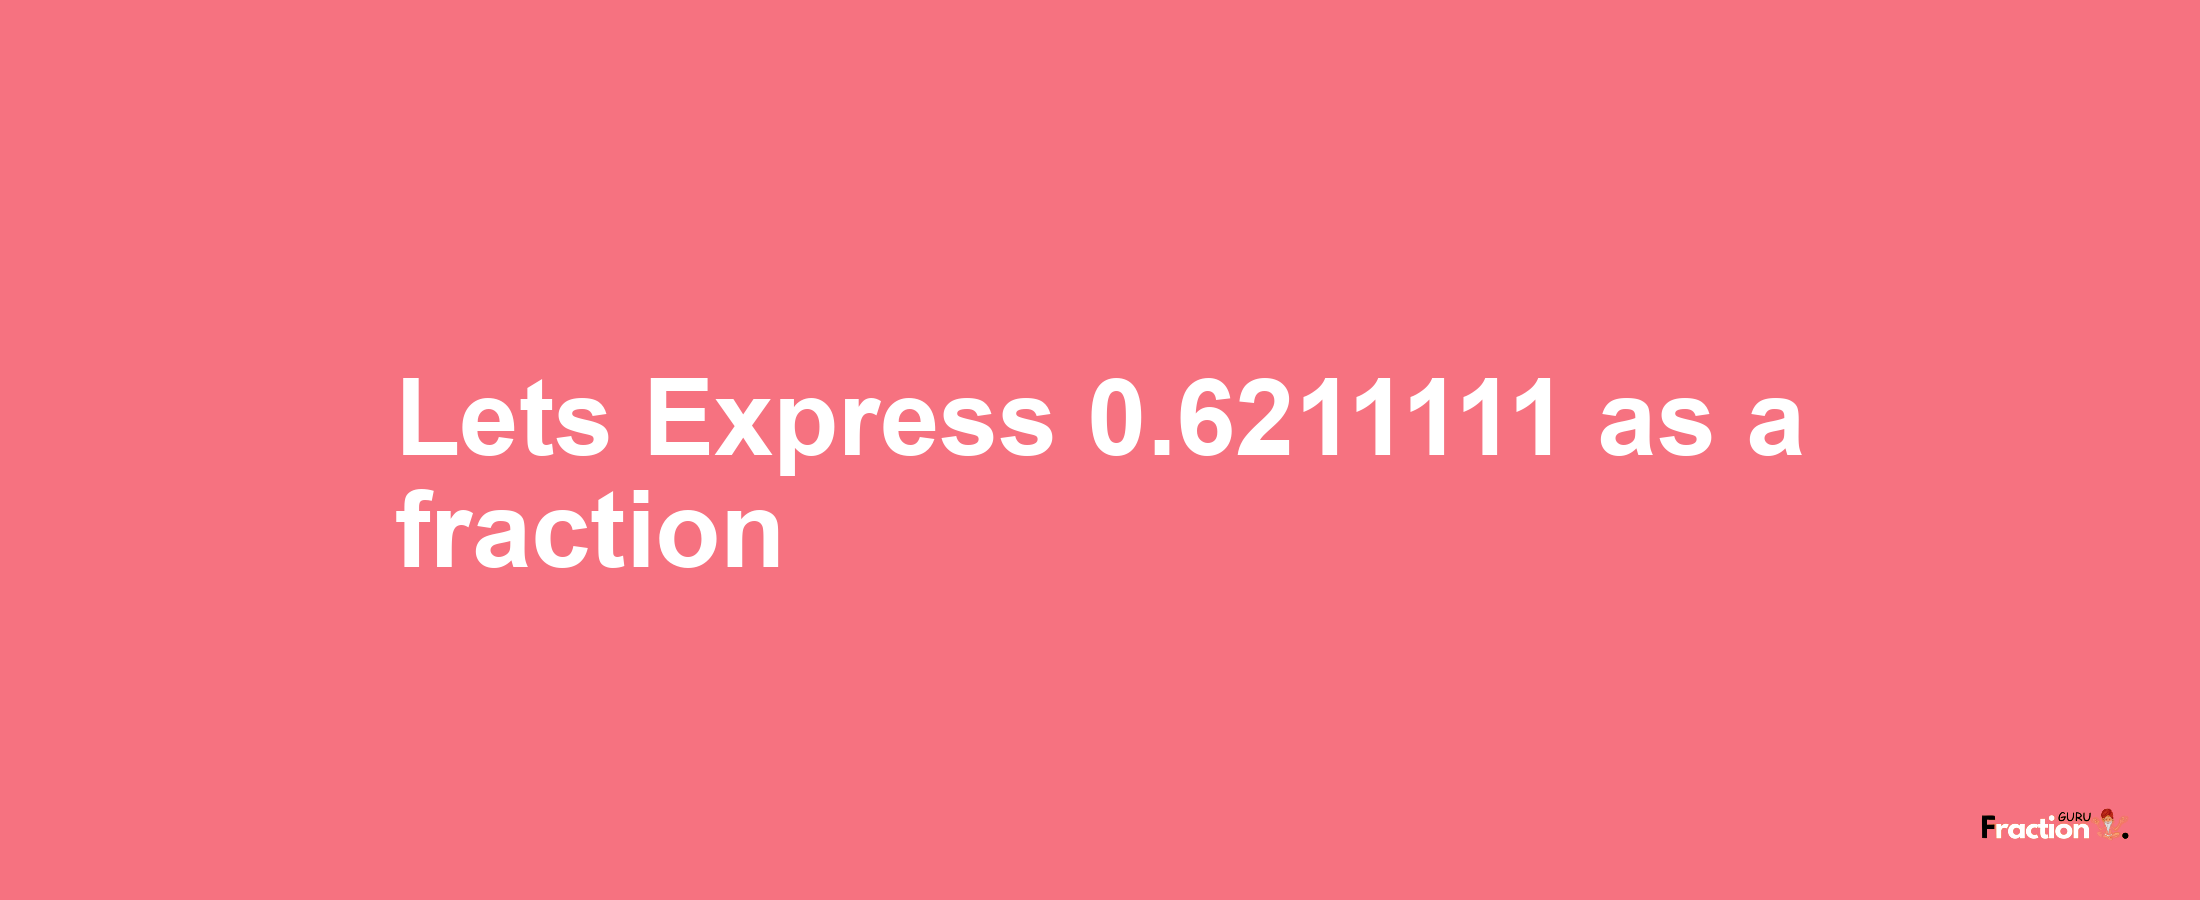 Lets Express 0.6211111 as afraction